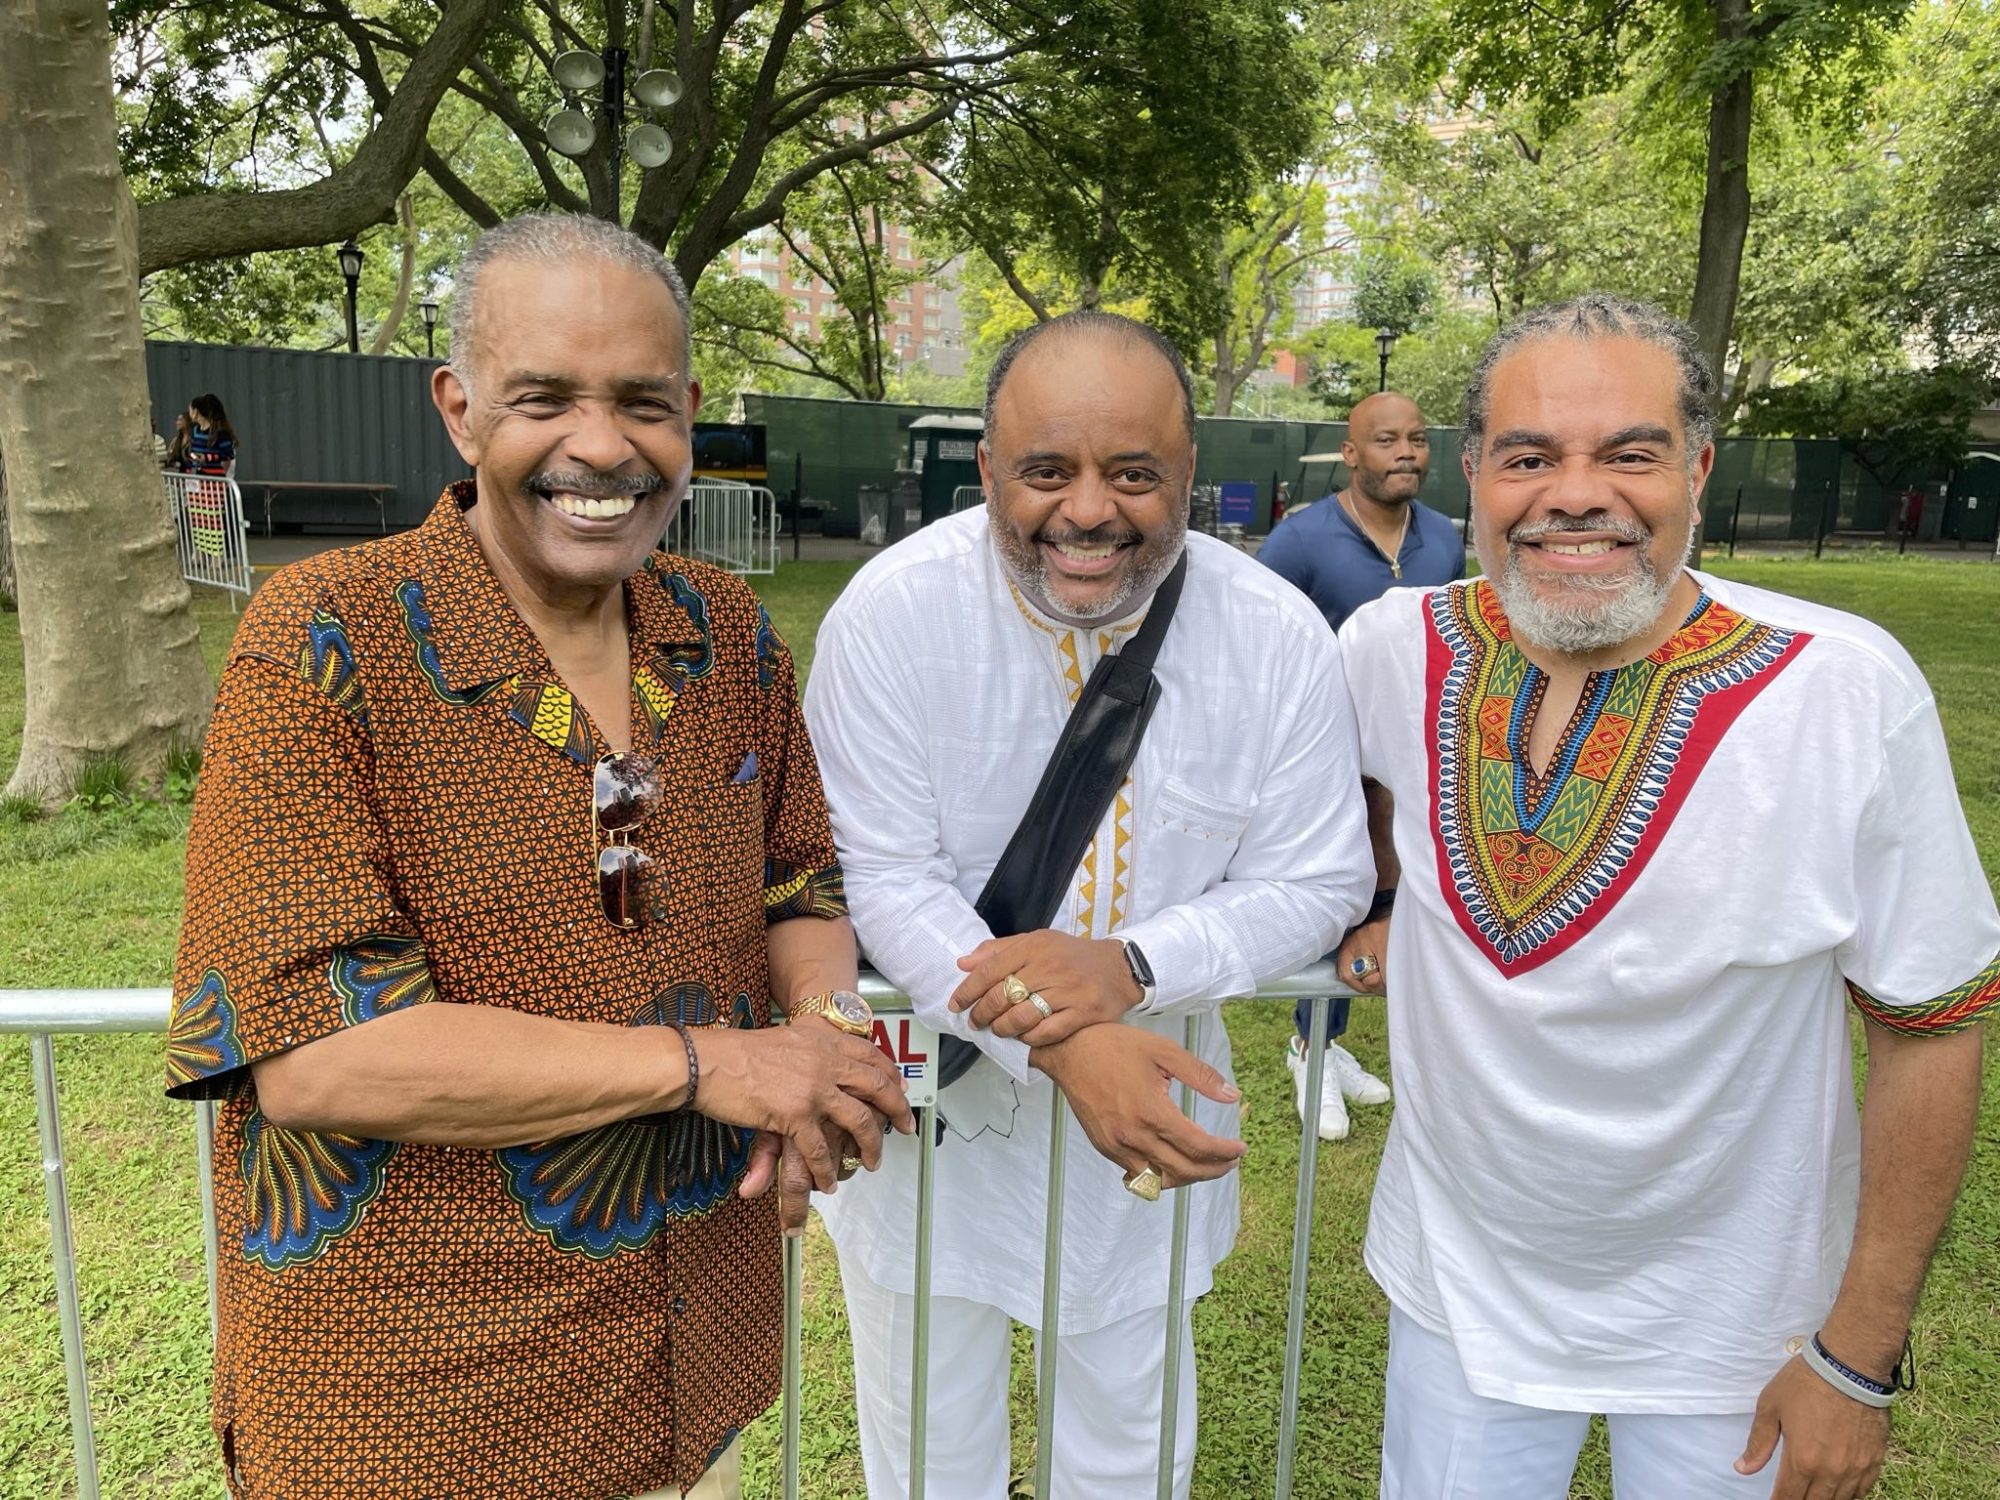 Joe Madison (left), the talk show host, activist and philanthropist known as “The Black Eagle,” shares a happy moment with fellow journalists and activists Roland Martin (center) and Rev. Mark Thompson.